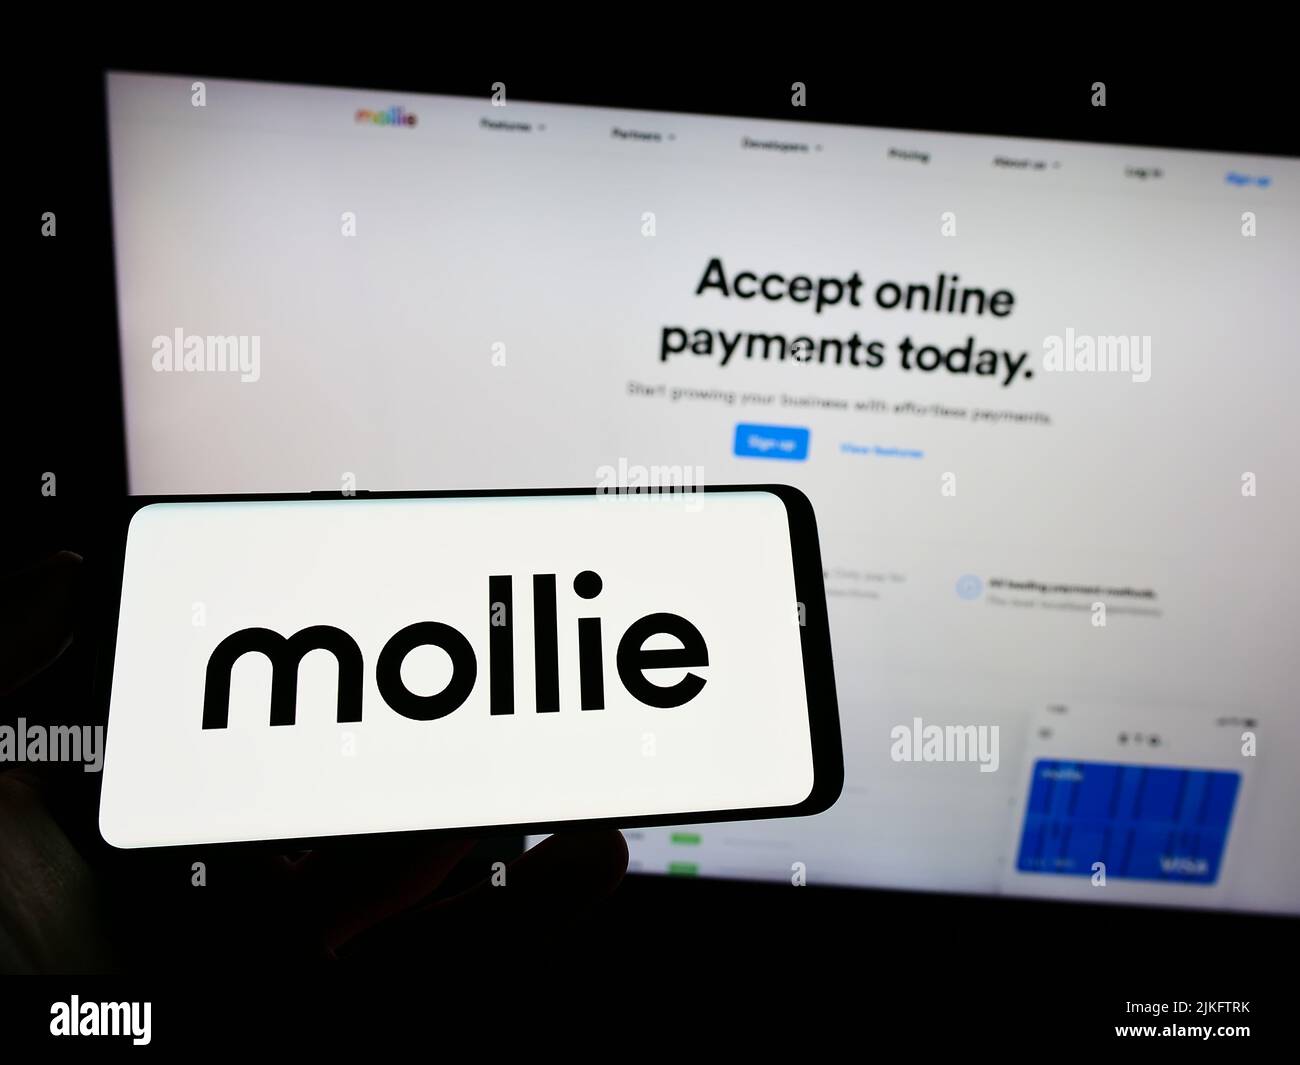 Person holding cellphone with logo of Dutch payments company Mollie B.V. on screen in front of business webpage. Focus on phone display. Stock Photo